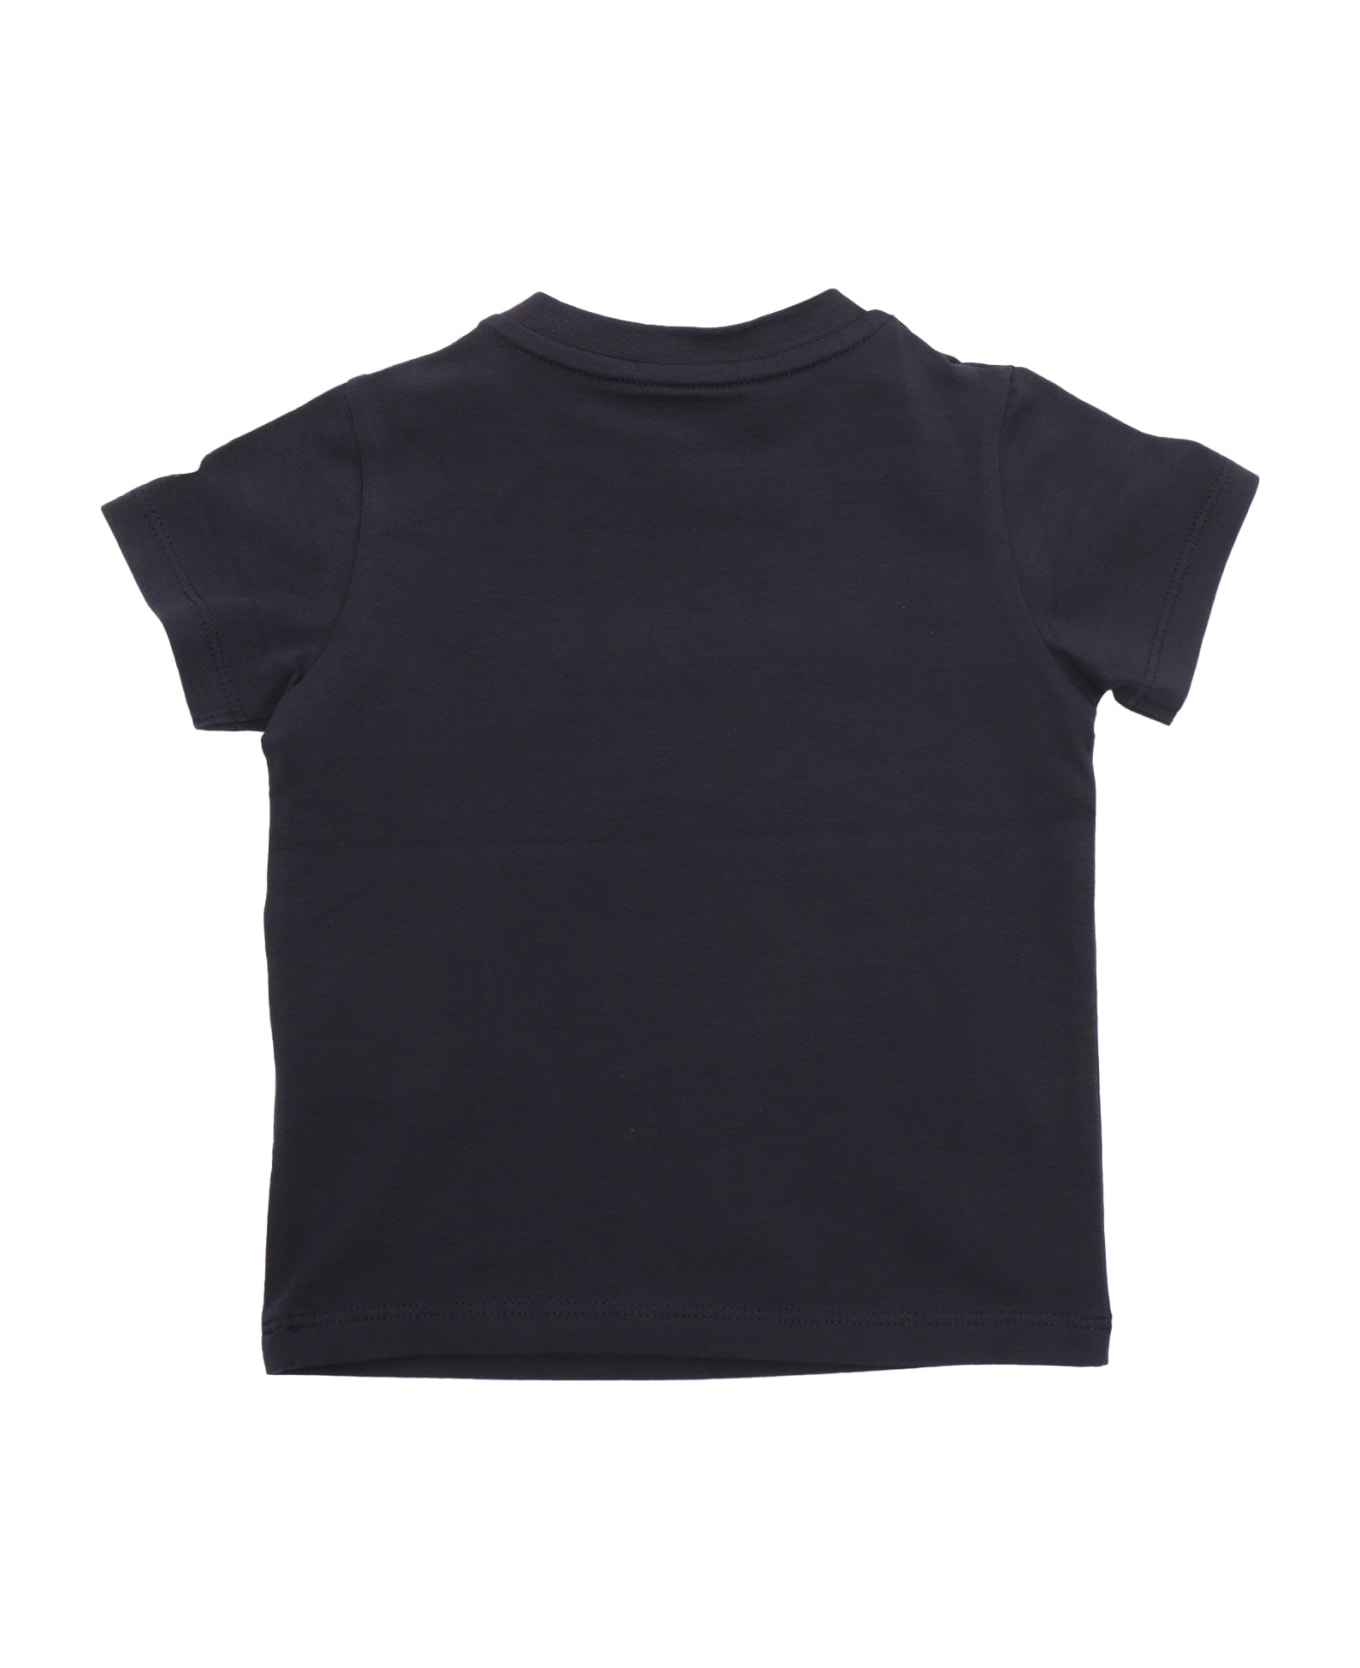 Moncler Black T-shirt With Logo - BLUE Tシャツ＆ポロシャツ